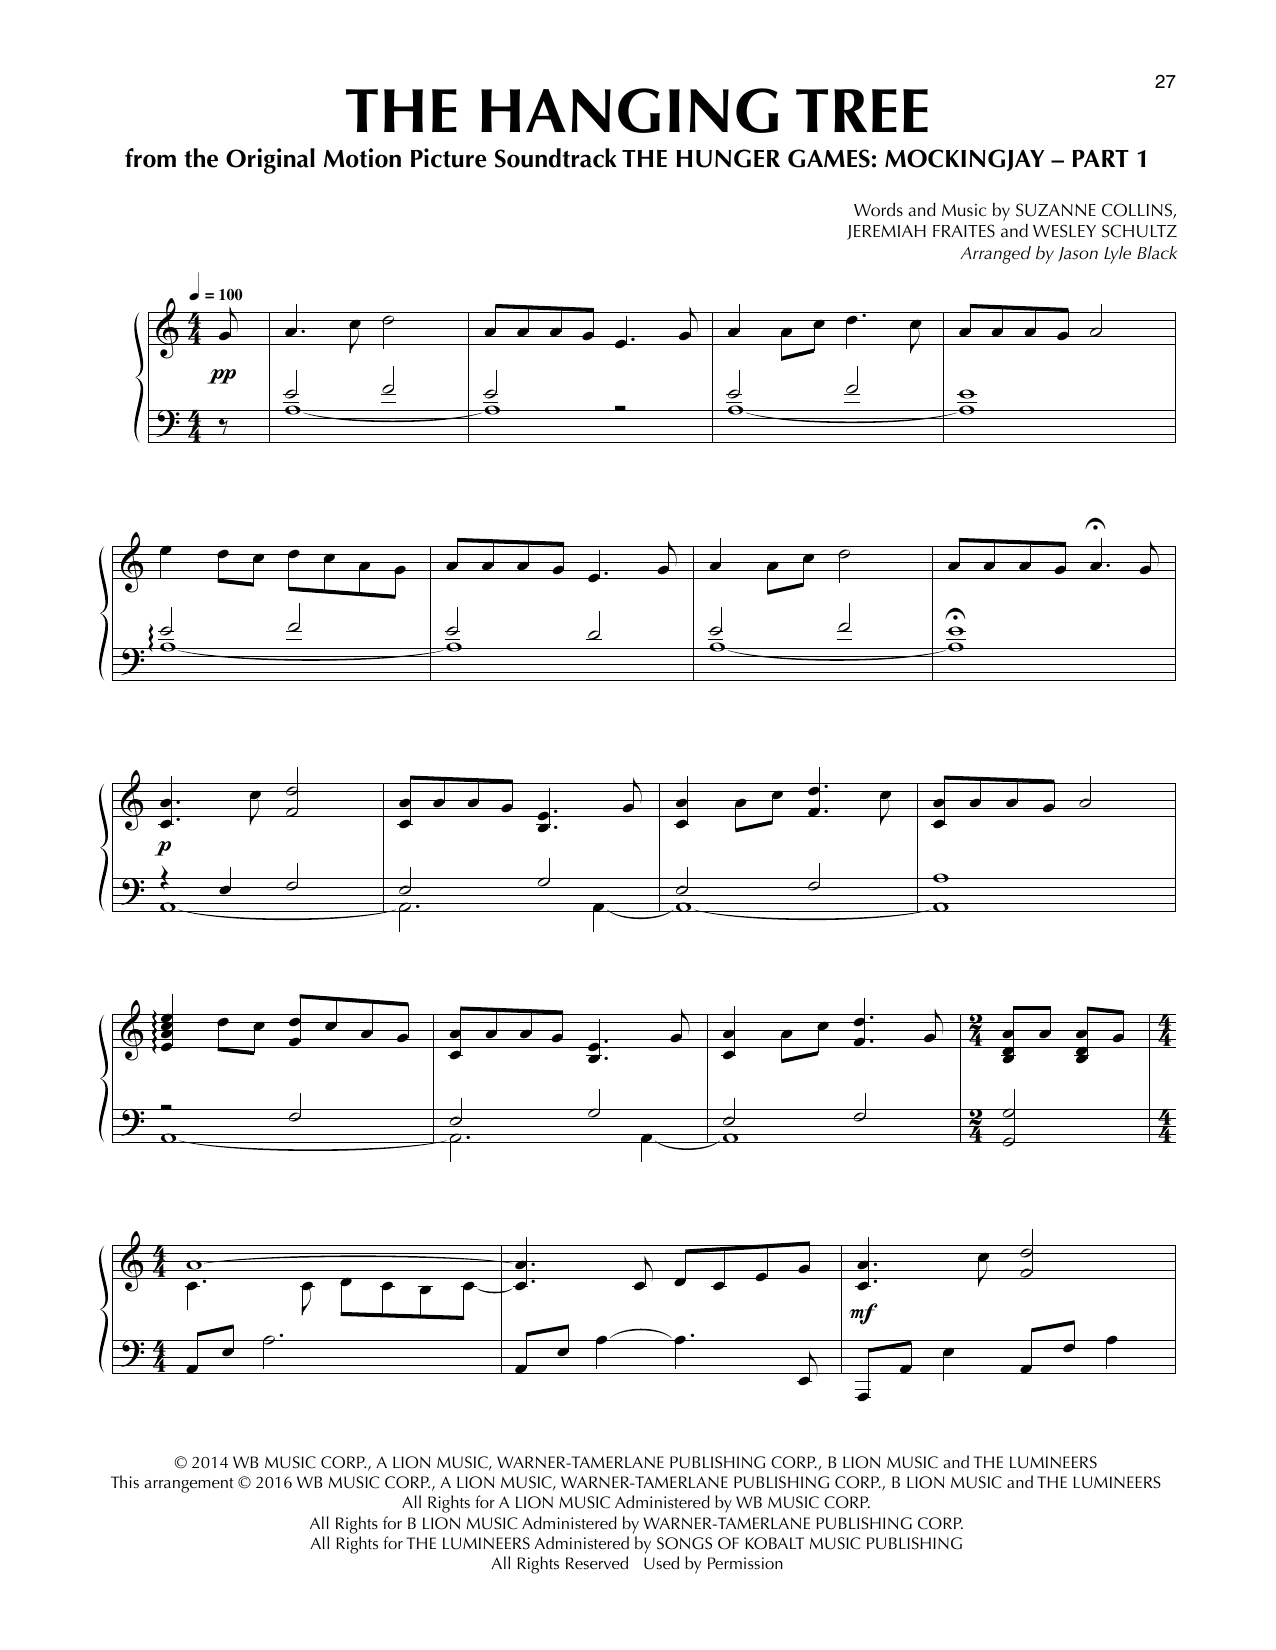 James Newton "The Hanging Tree (from The Hunger Games: Mockingjay Part 1) (arr. Jason Lyle Black)" Sheet Music Notes | Download Printable PDF Score 174547